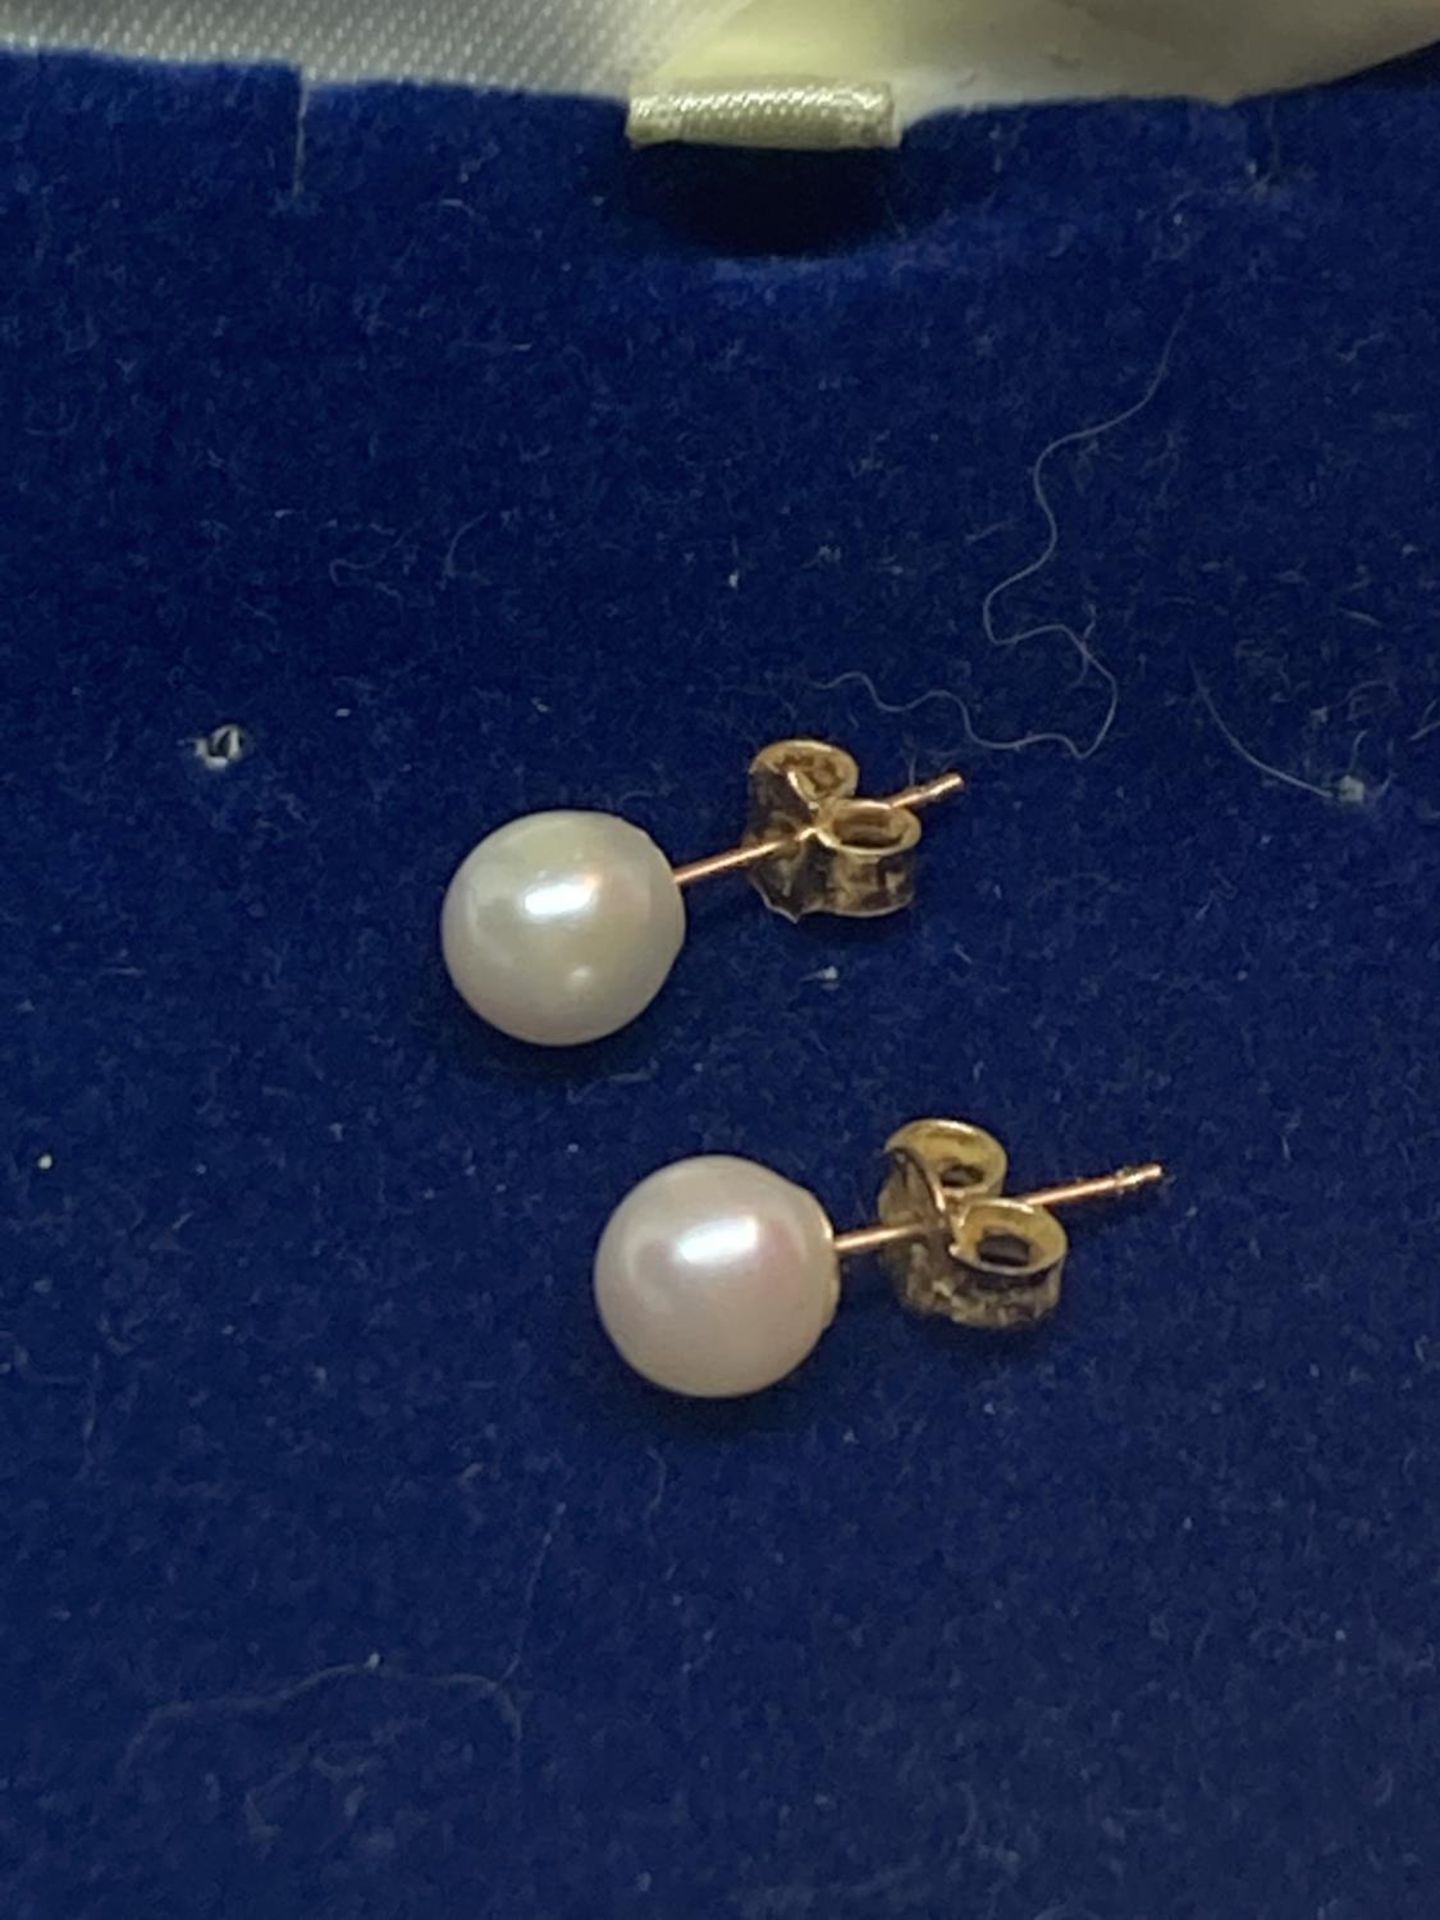 A PAIR OF 9 CARAT GOLD ANDPEARL EARRINGS IN A PRESENTATION BOX